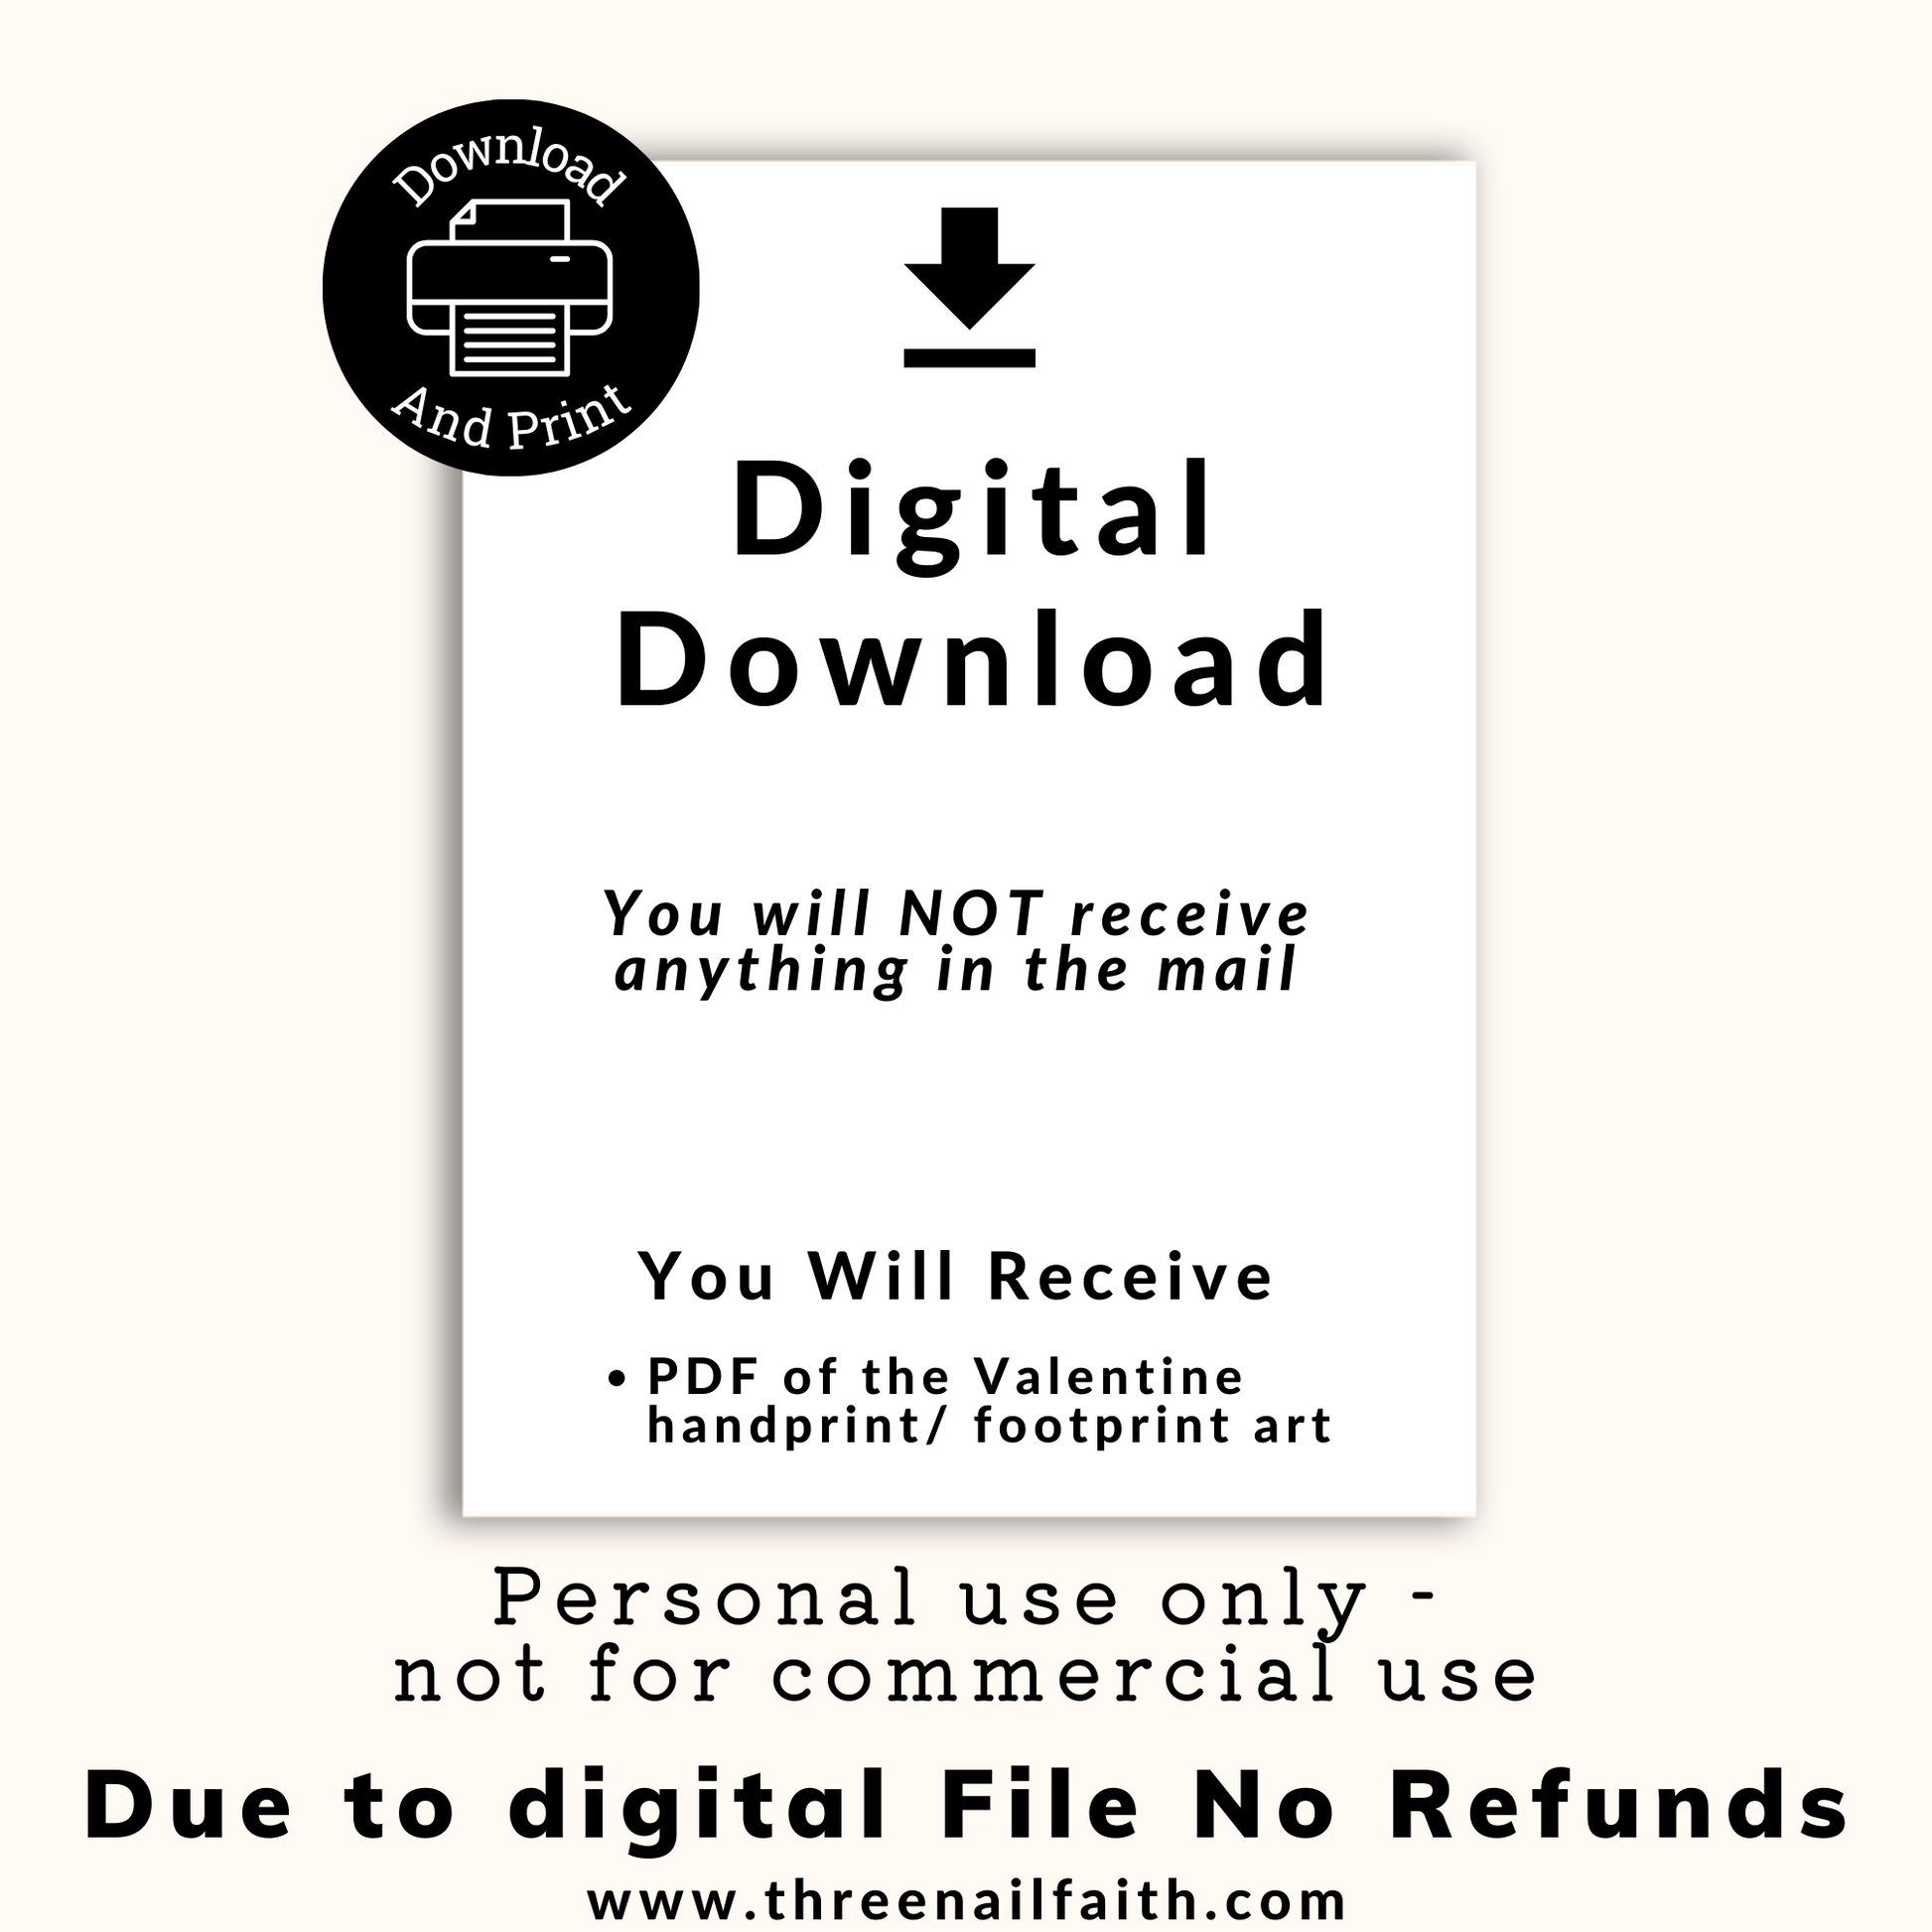 This is a digital download you will not receive anything in the mail, this file is for personal use only, you will receive a PDF file with the handprint activity